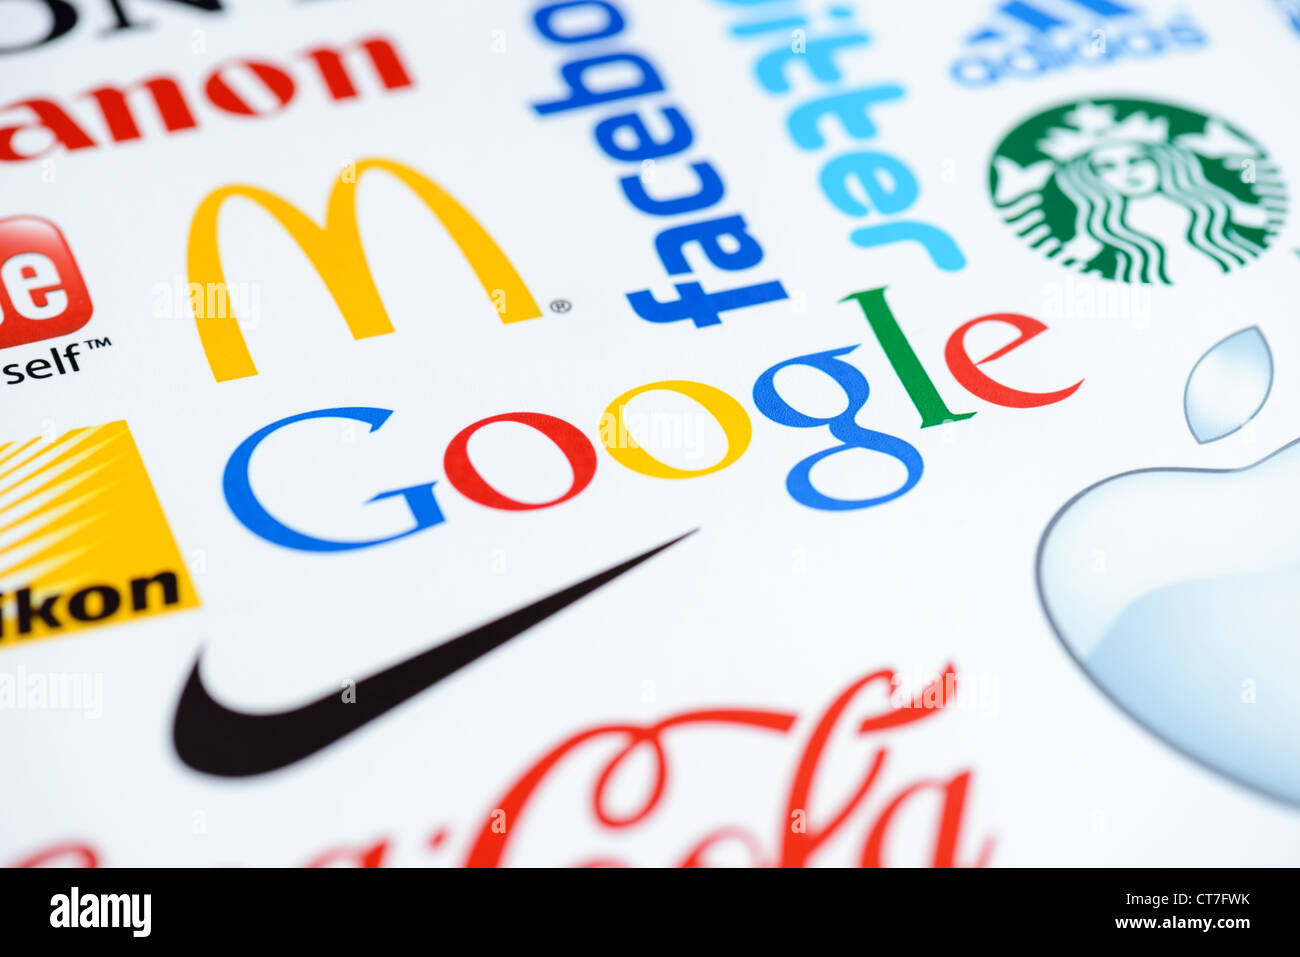 Close up photo of the Google logo on the printed paper together with a collection of well-known brands of the world. Stock Photo